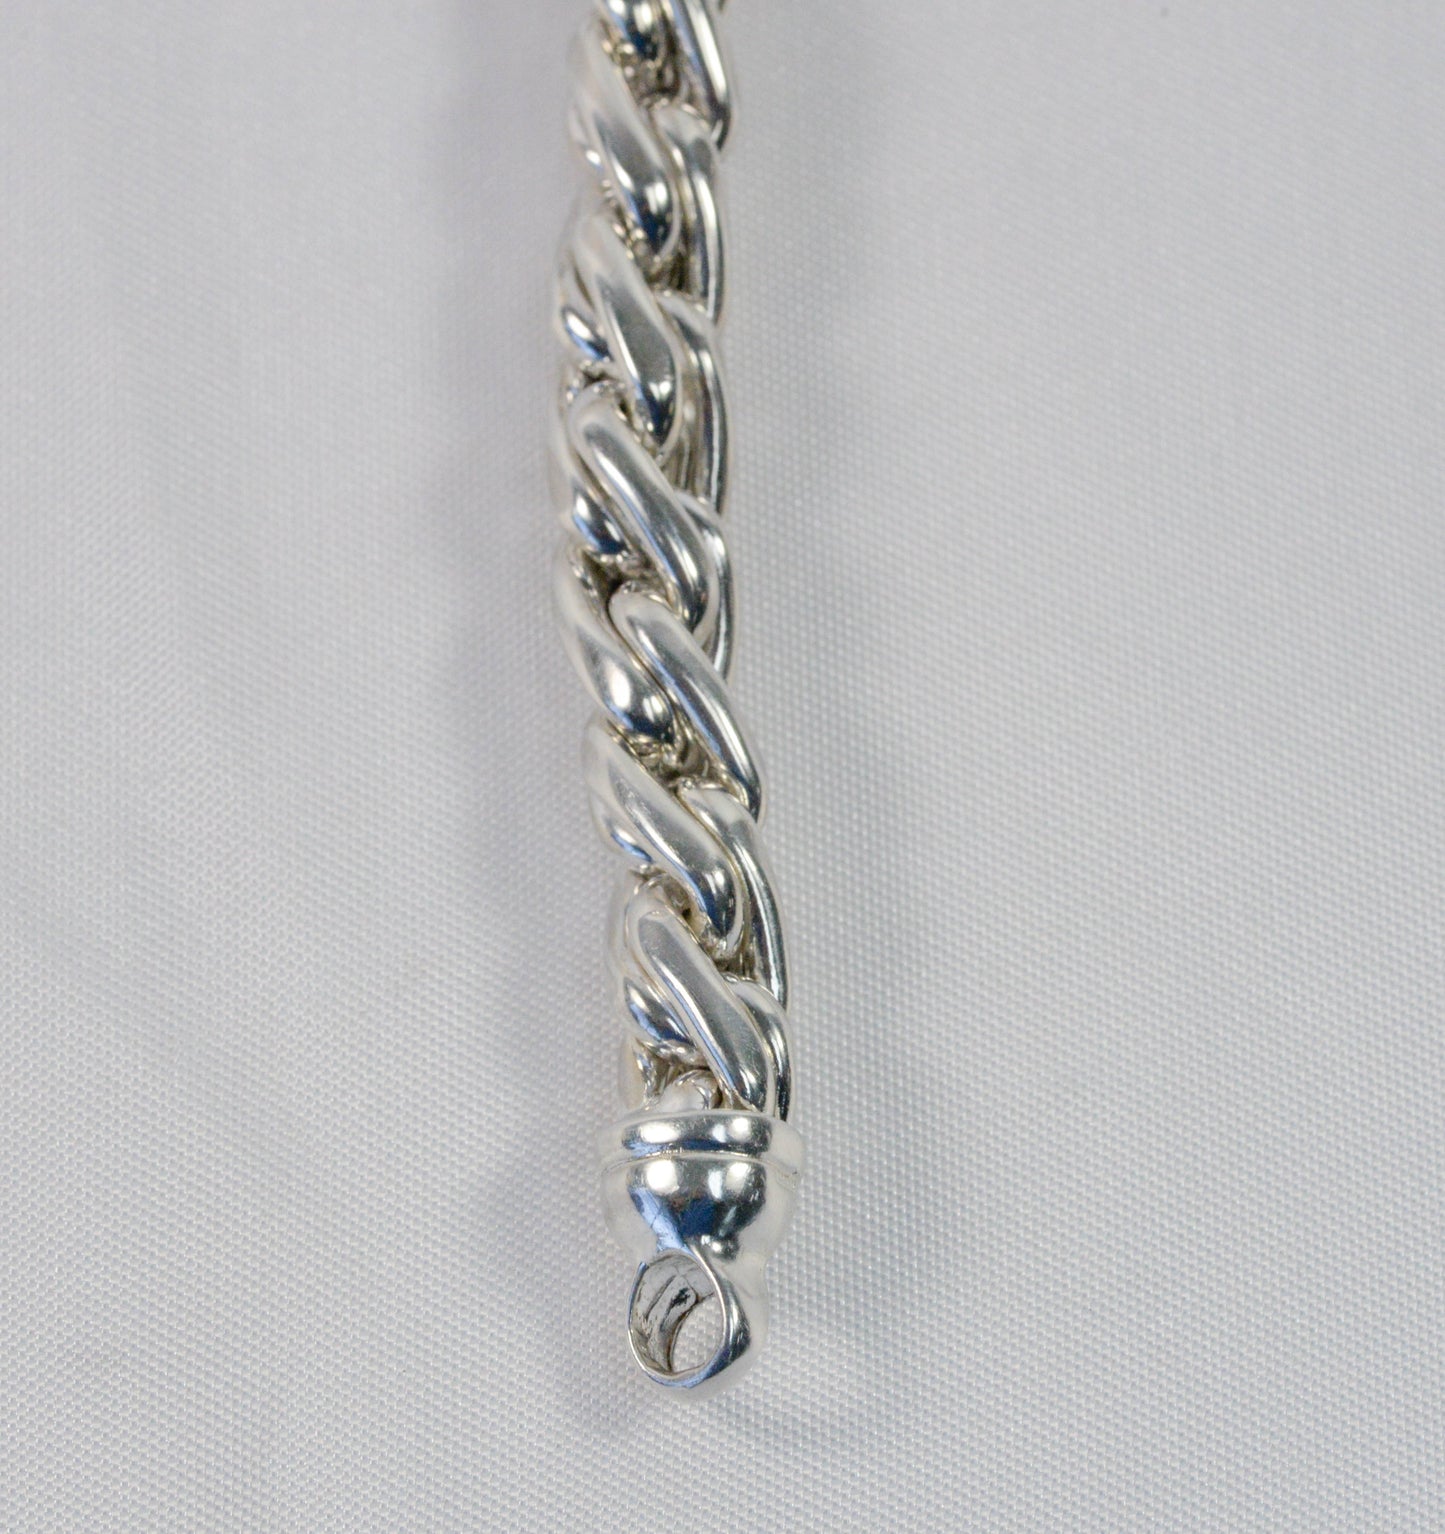 Heavy Sterling Silver Wheat Style Chain, 24 inches - 119.2g